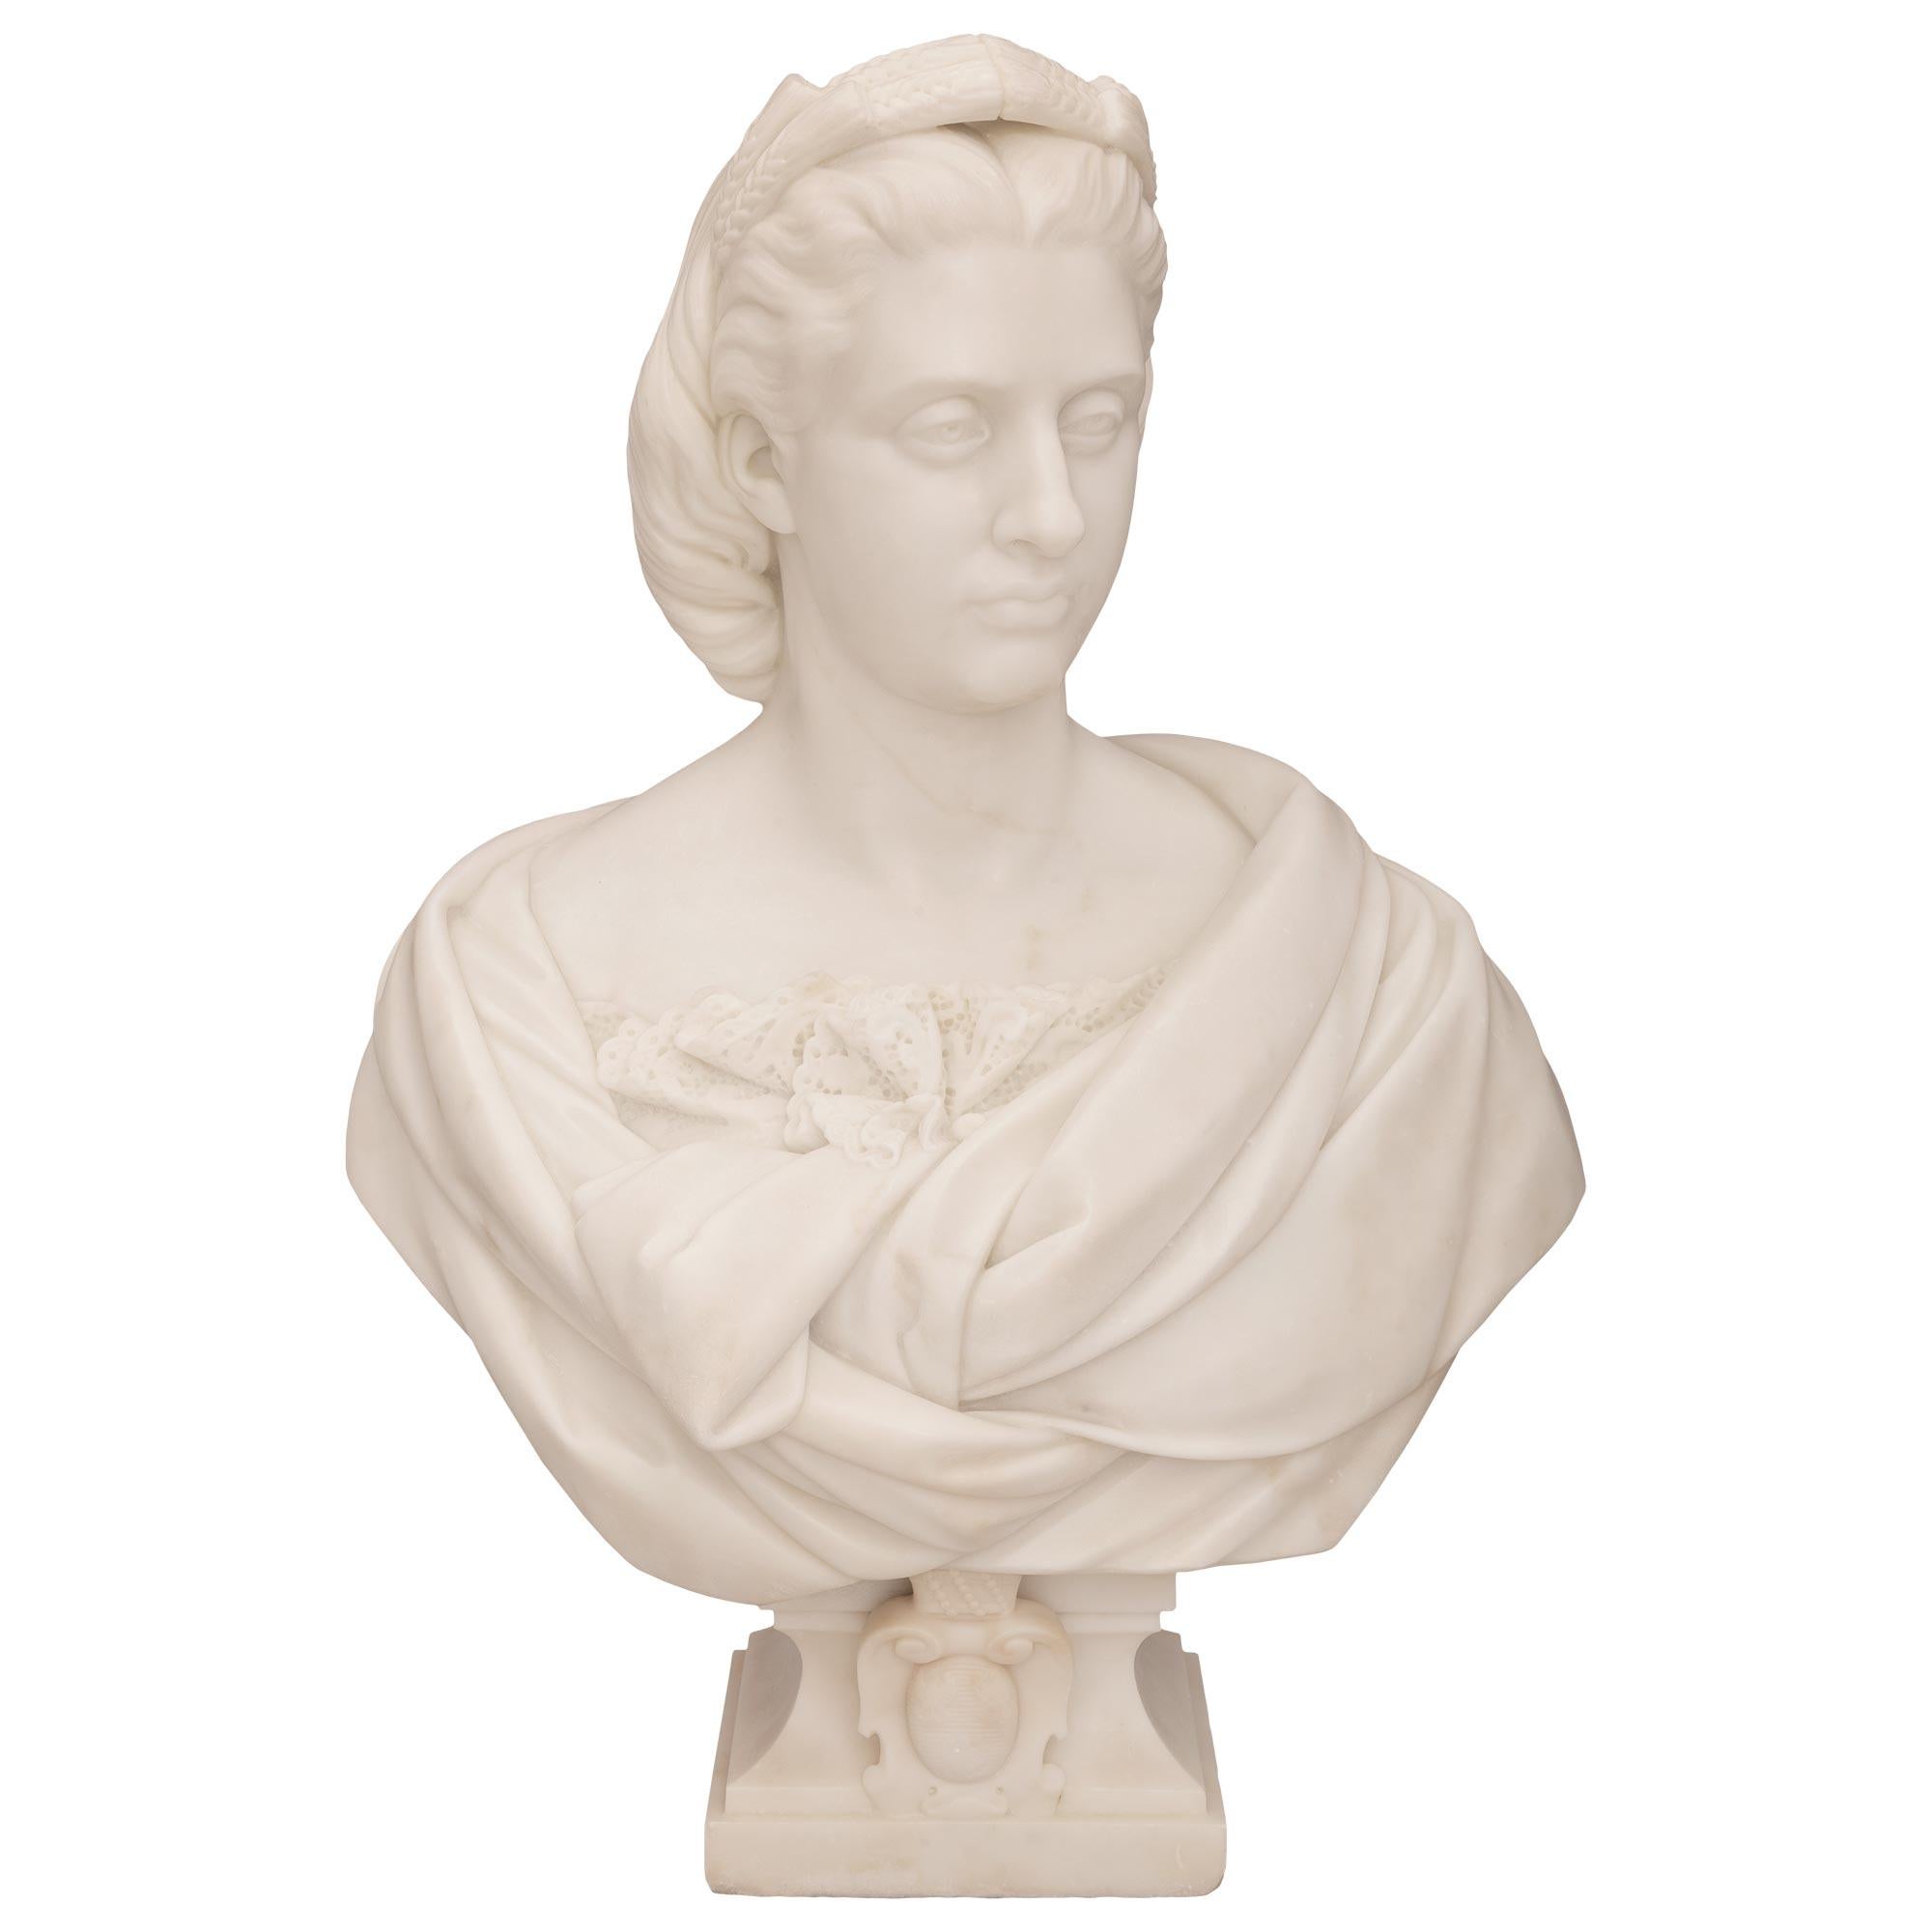 A beautiful and large scale marble French 19th century white Carrara marble bust signed Paul Aubé 1864. The very high quality bust is raised by a square base with an elegantly curved socle shaped support with a mottled border and striking central